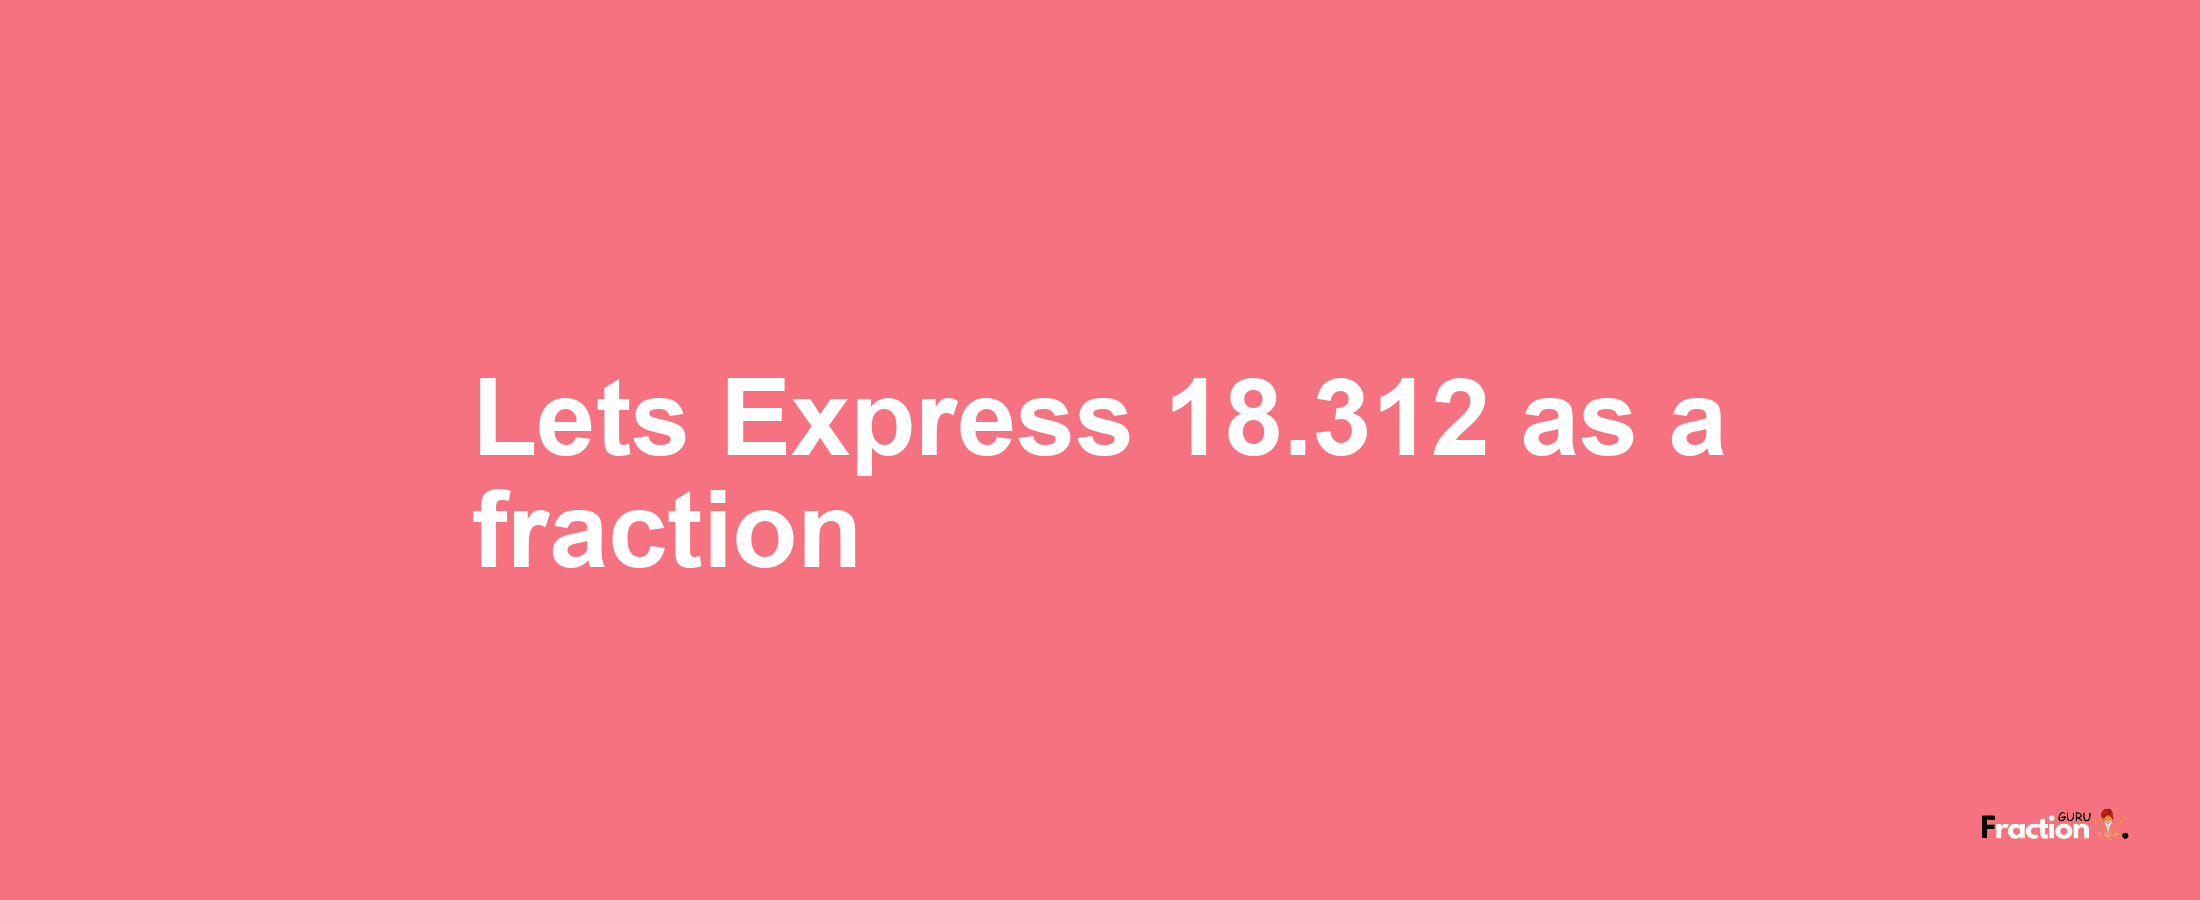 Lets Express 18.312 as afraction